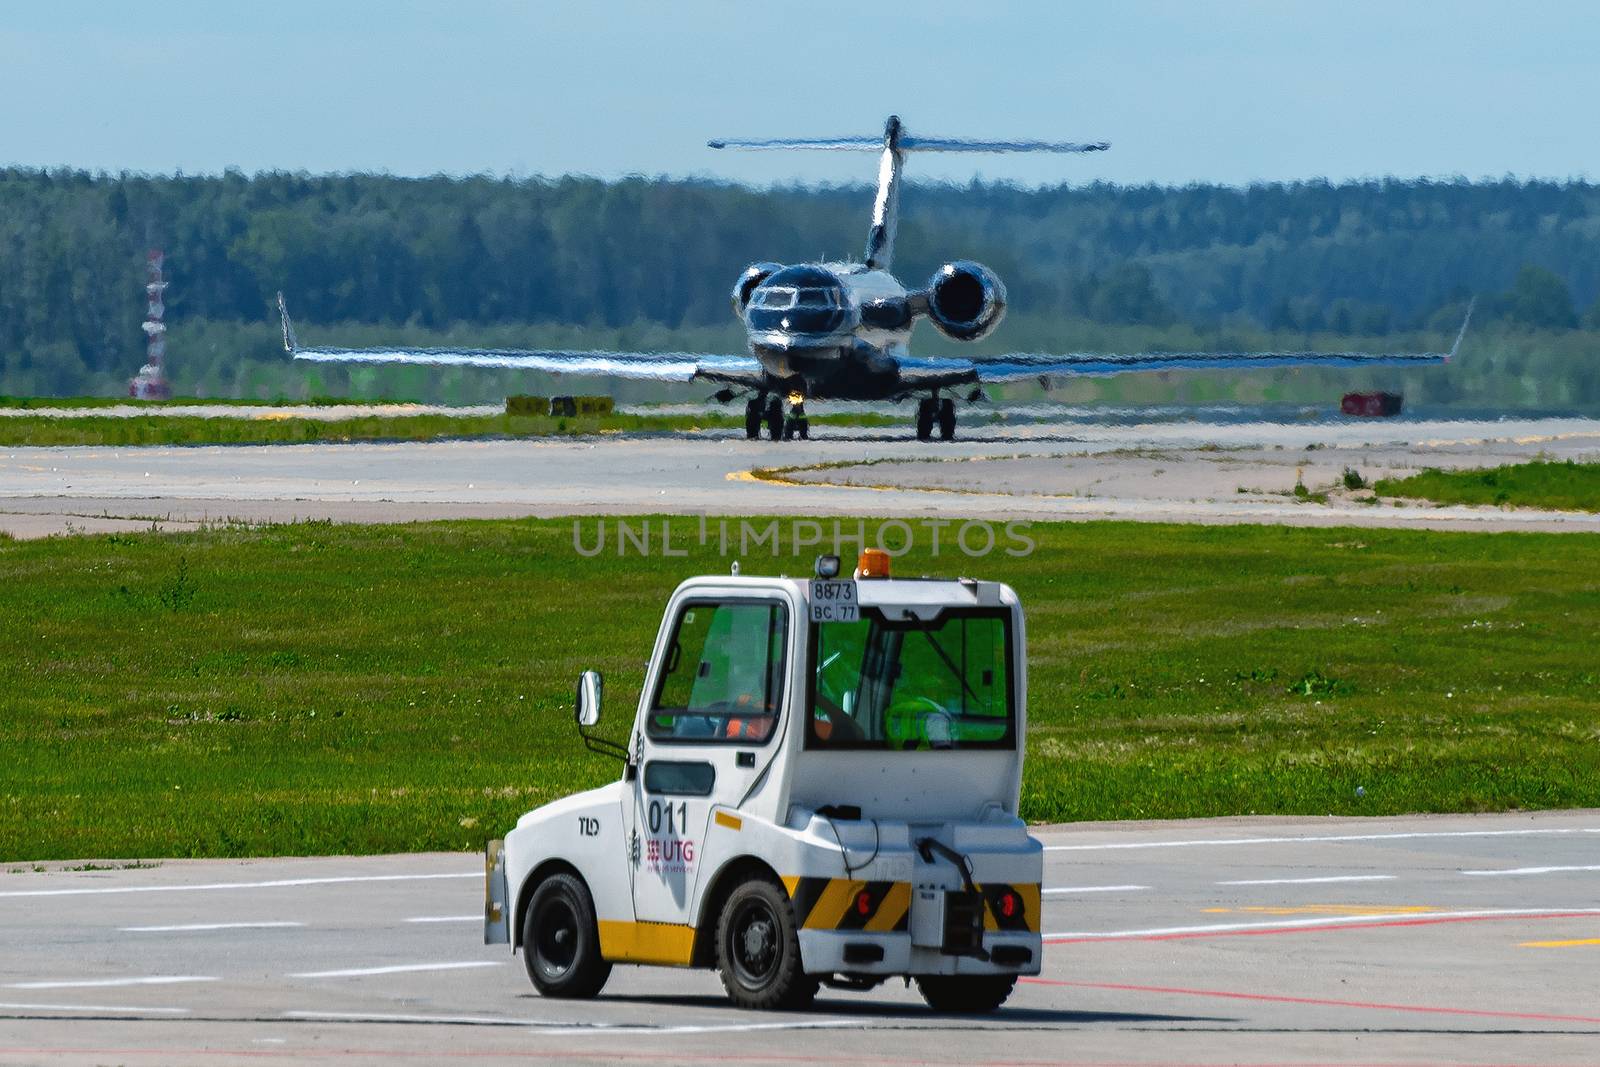 July 2, 2019 Moscow, Russia. Small airplane tractor at Vnukovo airport